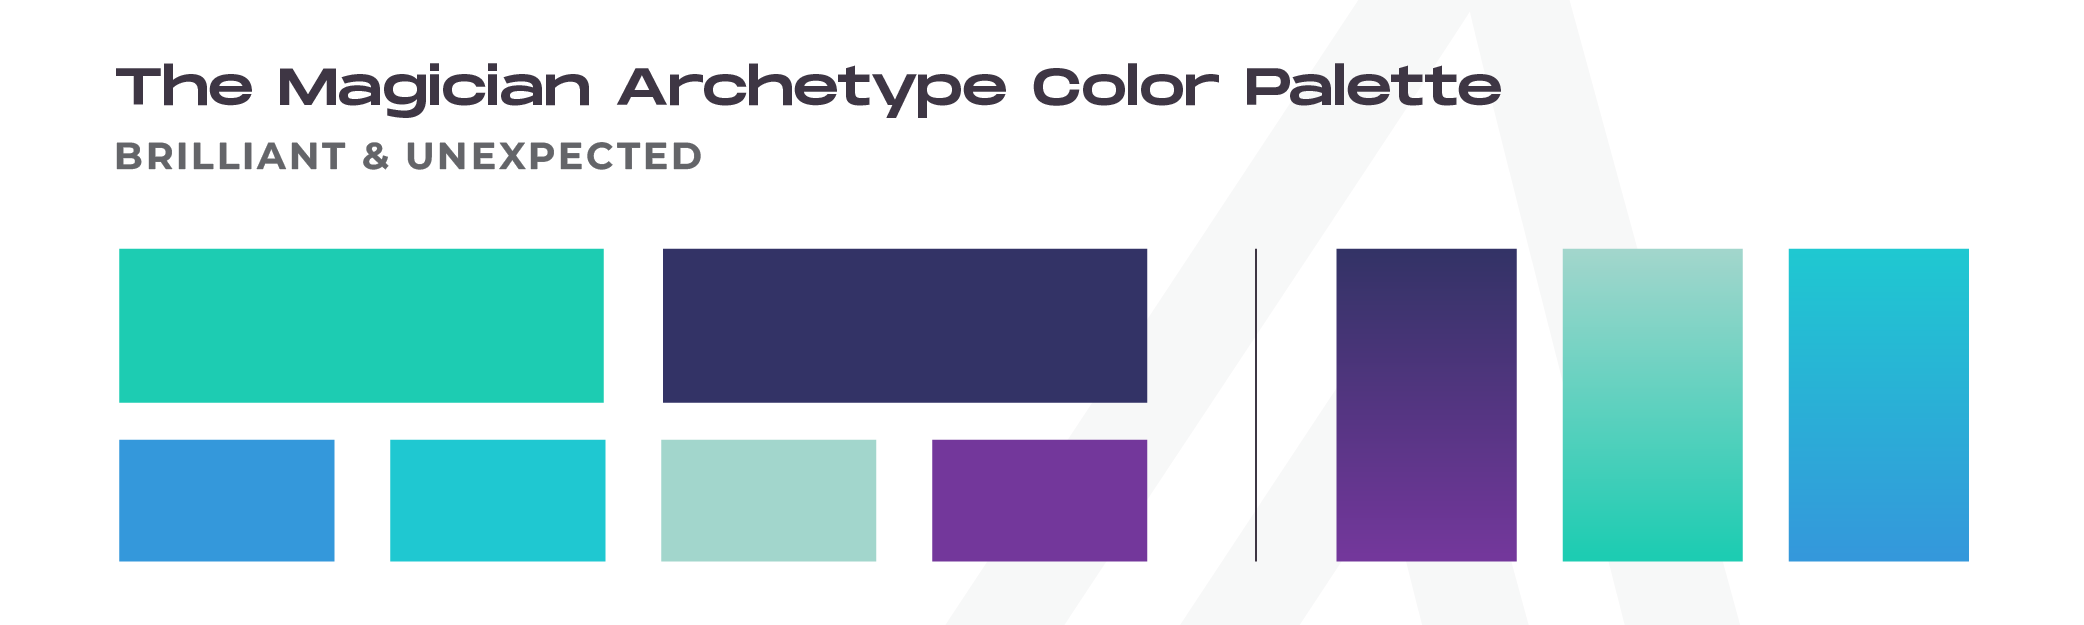 Brand Archetypes Color Palettes_The magician